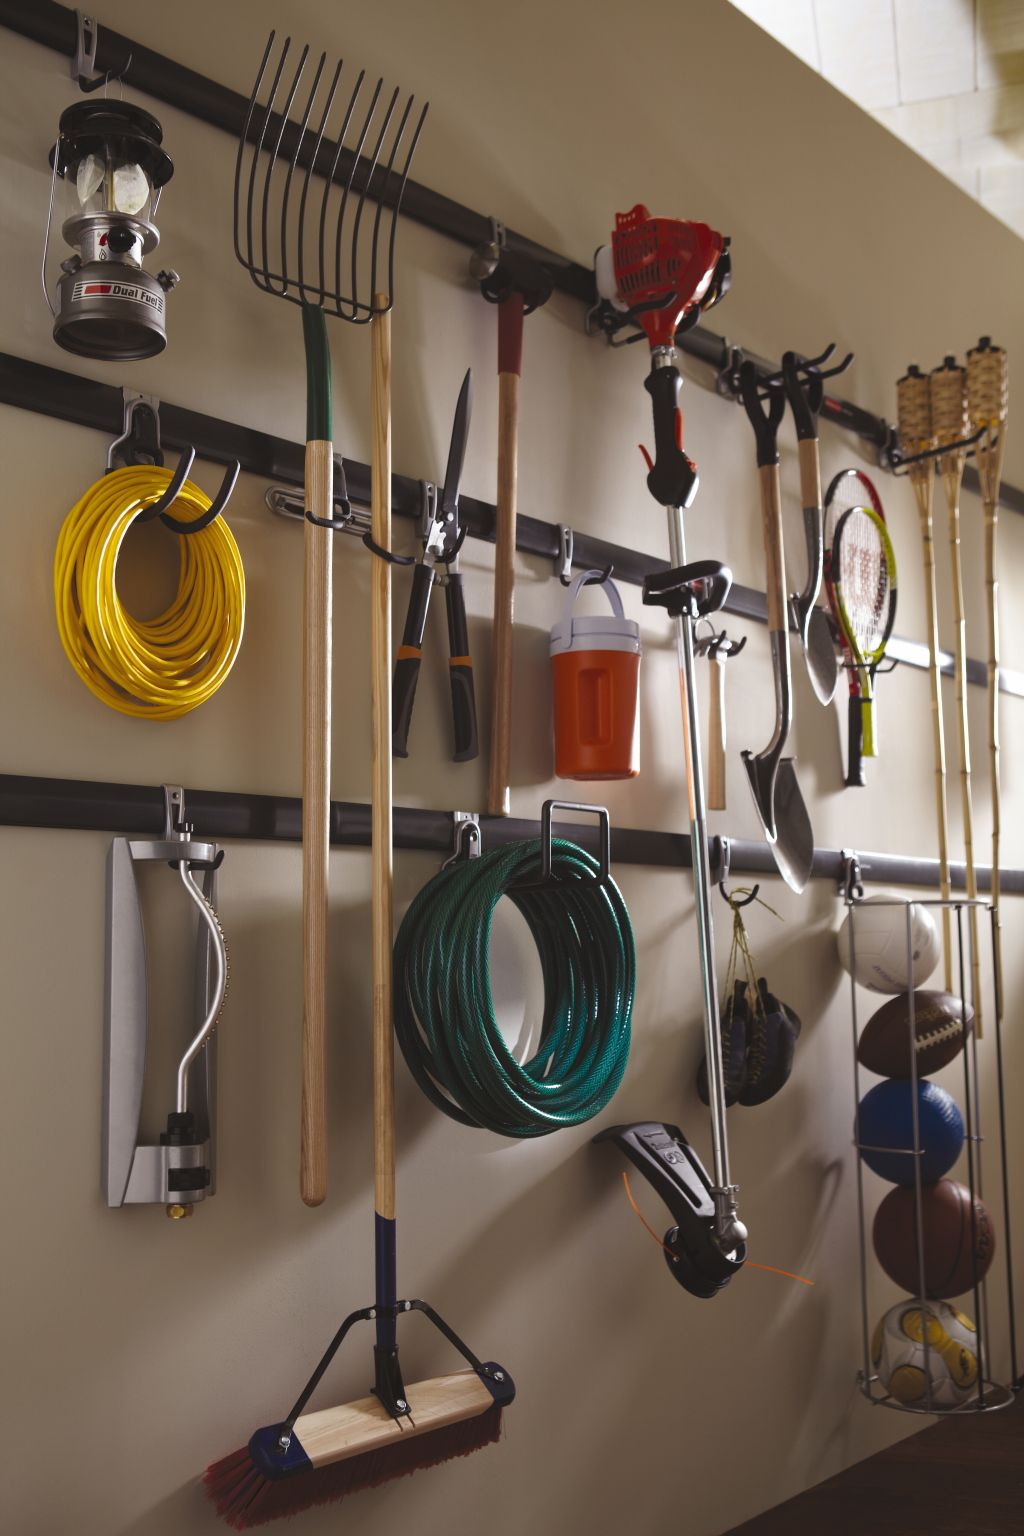 Best Way To Organize Garage
 Time To Sort Out The Mess – 20 Tips For A Well Organized